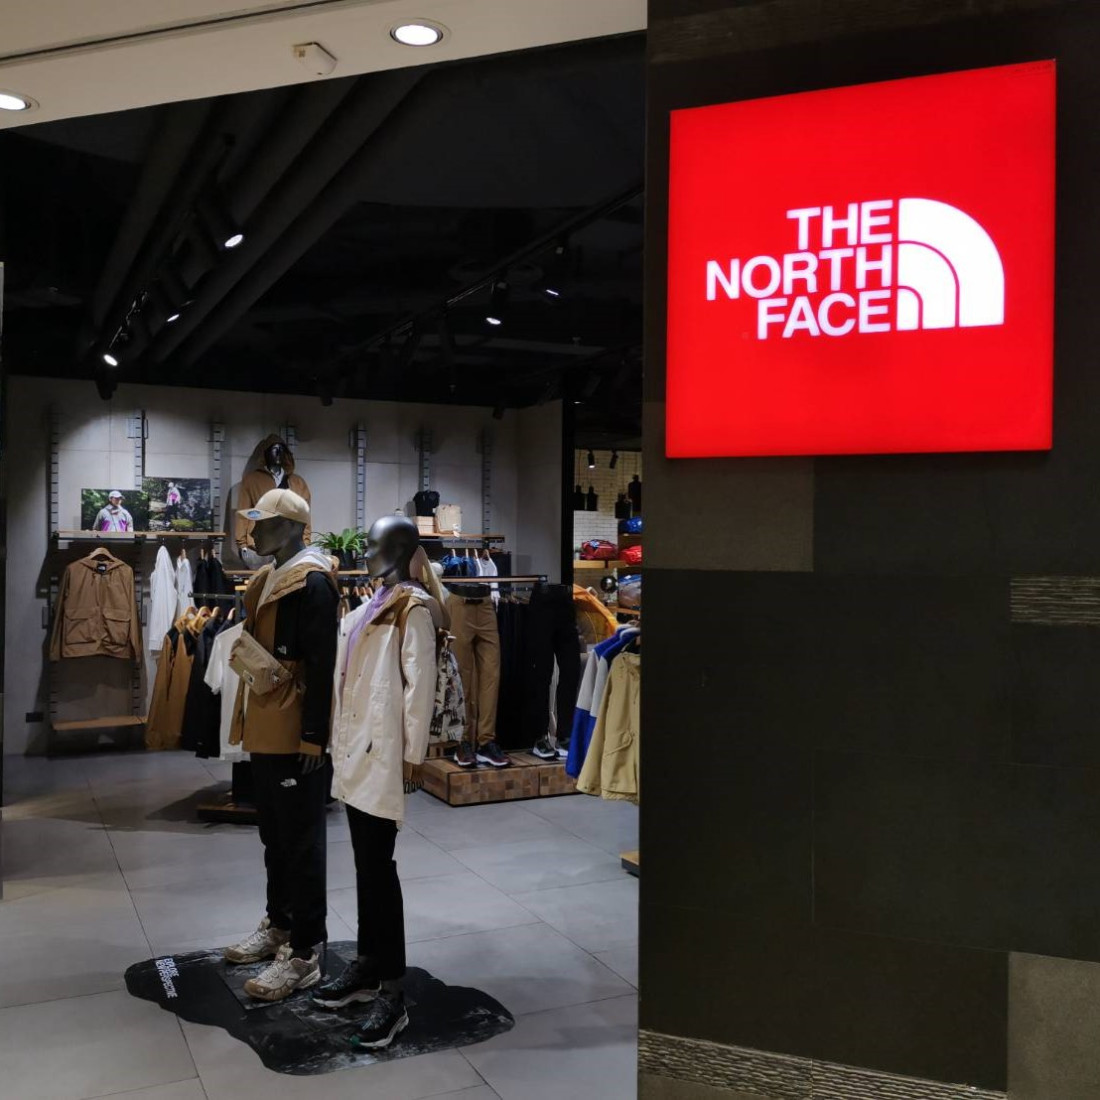 The North Face - Siam Discovery